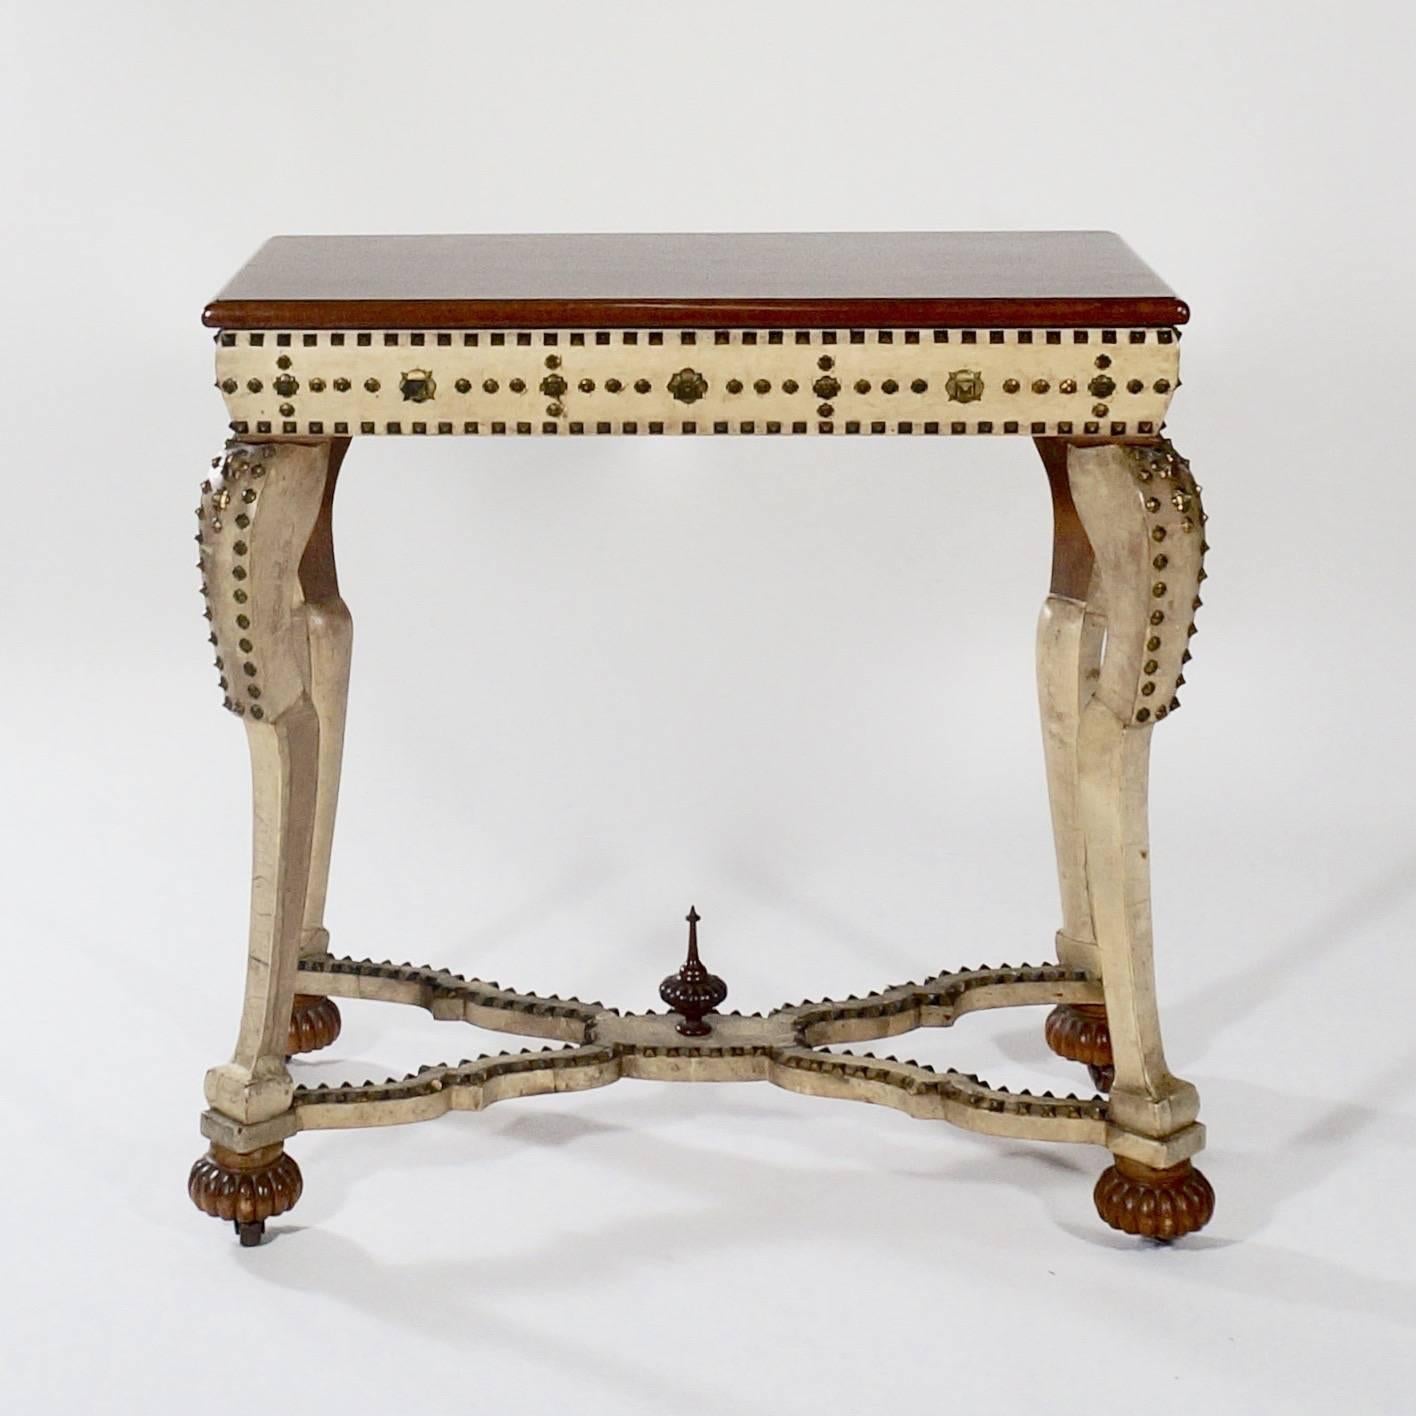 The walnut top above a frieze with decorative stud work supported by ogee legs on gadrooned bun feet joined by cross stretchers supporting a central finial.

Probably Spain, circa 1880s with later elements.